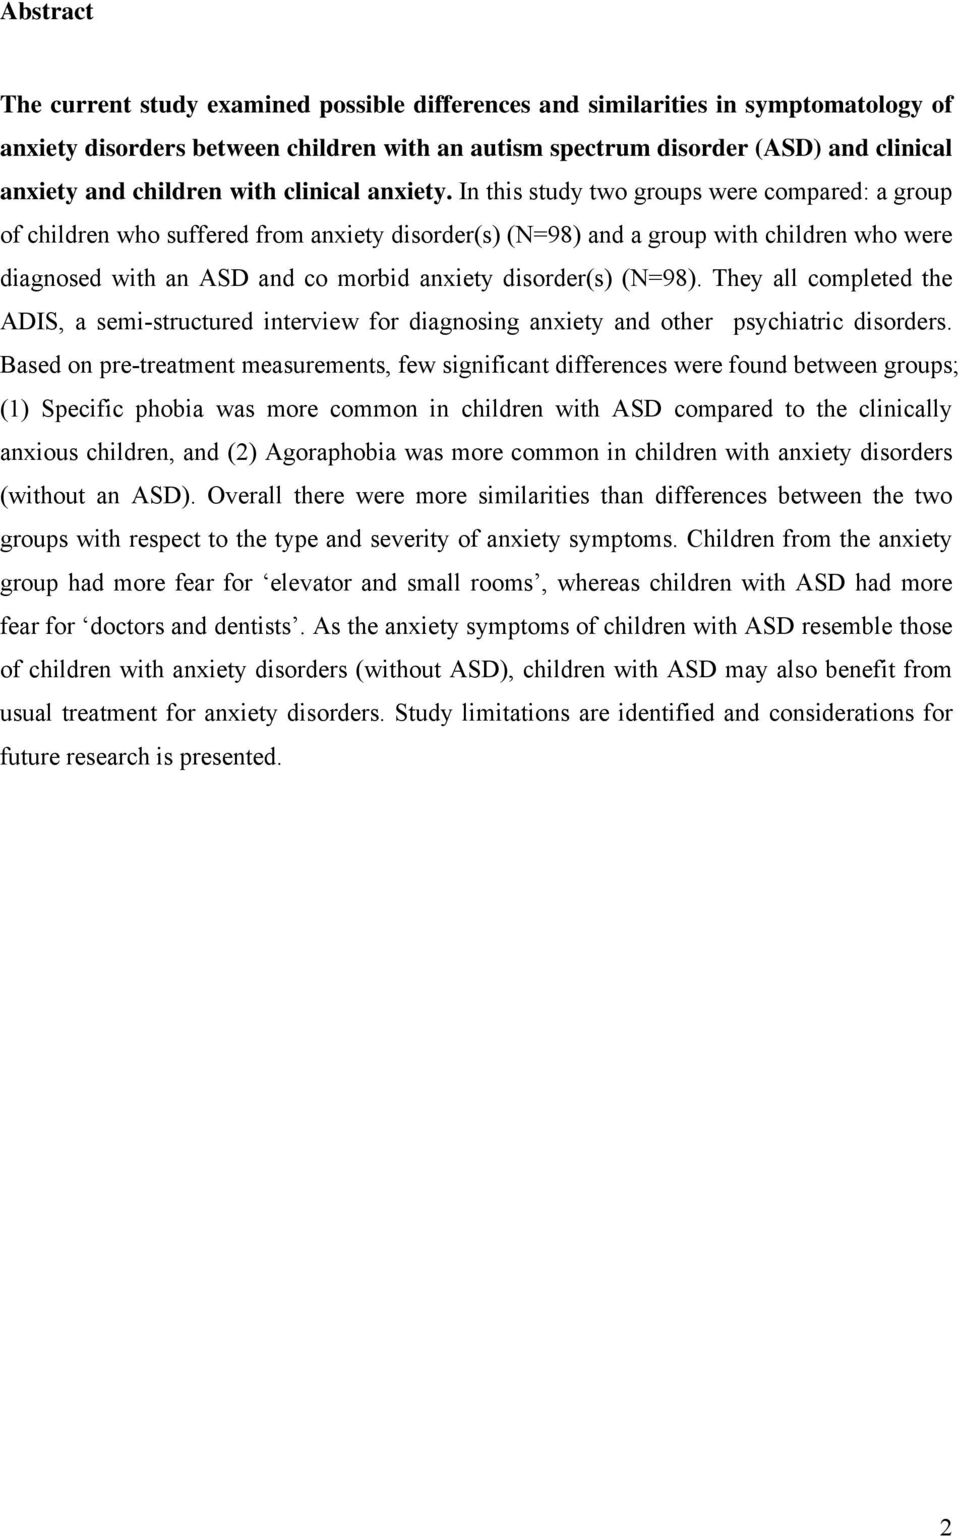 In this study two groups were compared: a group of children who suffered from anxiety disorder(s) (N=98) and a group with children who were diagnosed with an ASD and co morbid anxiety disorder(s)